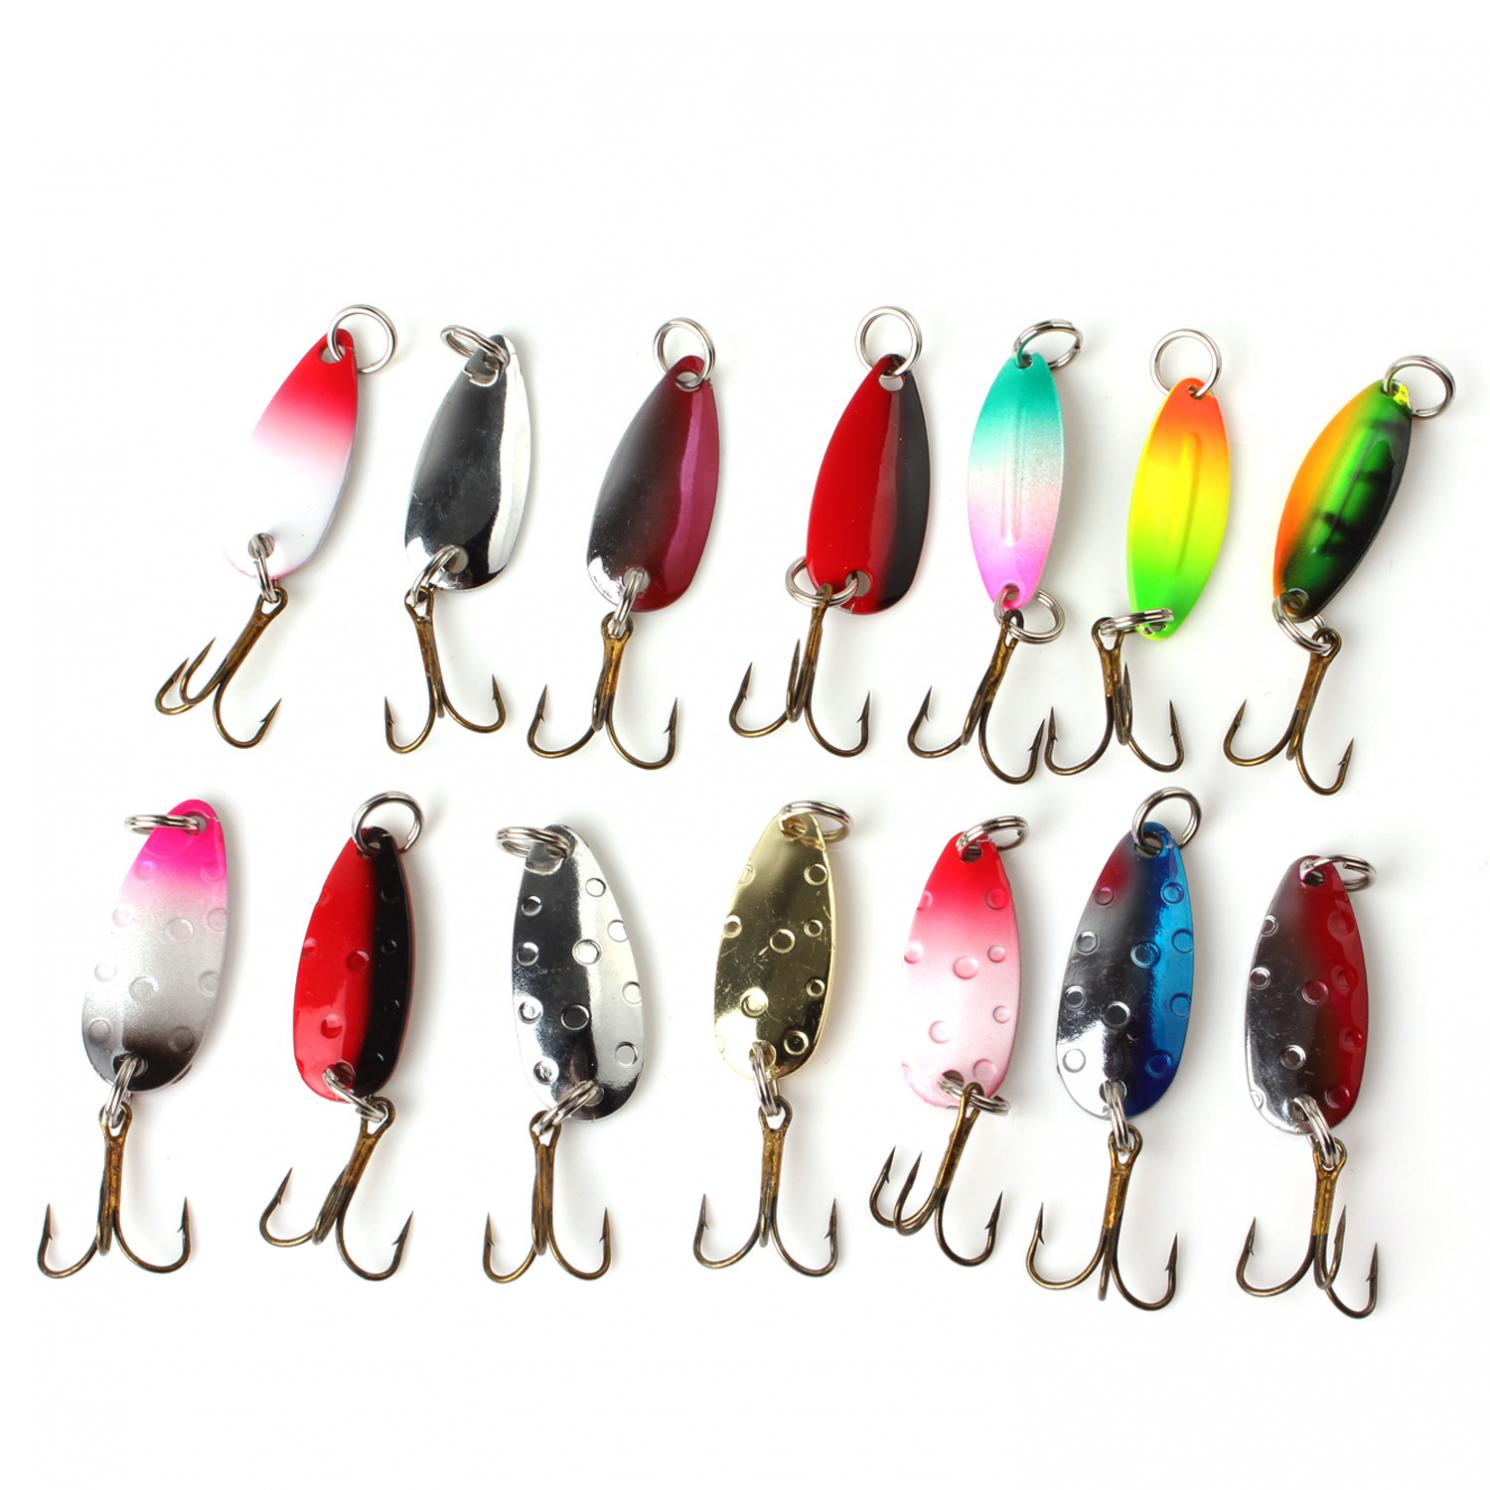 1pc Colorful Trout Spoon Metal Fishing Lures Spinner Baits Bass Tackle New N1P3